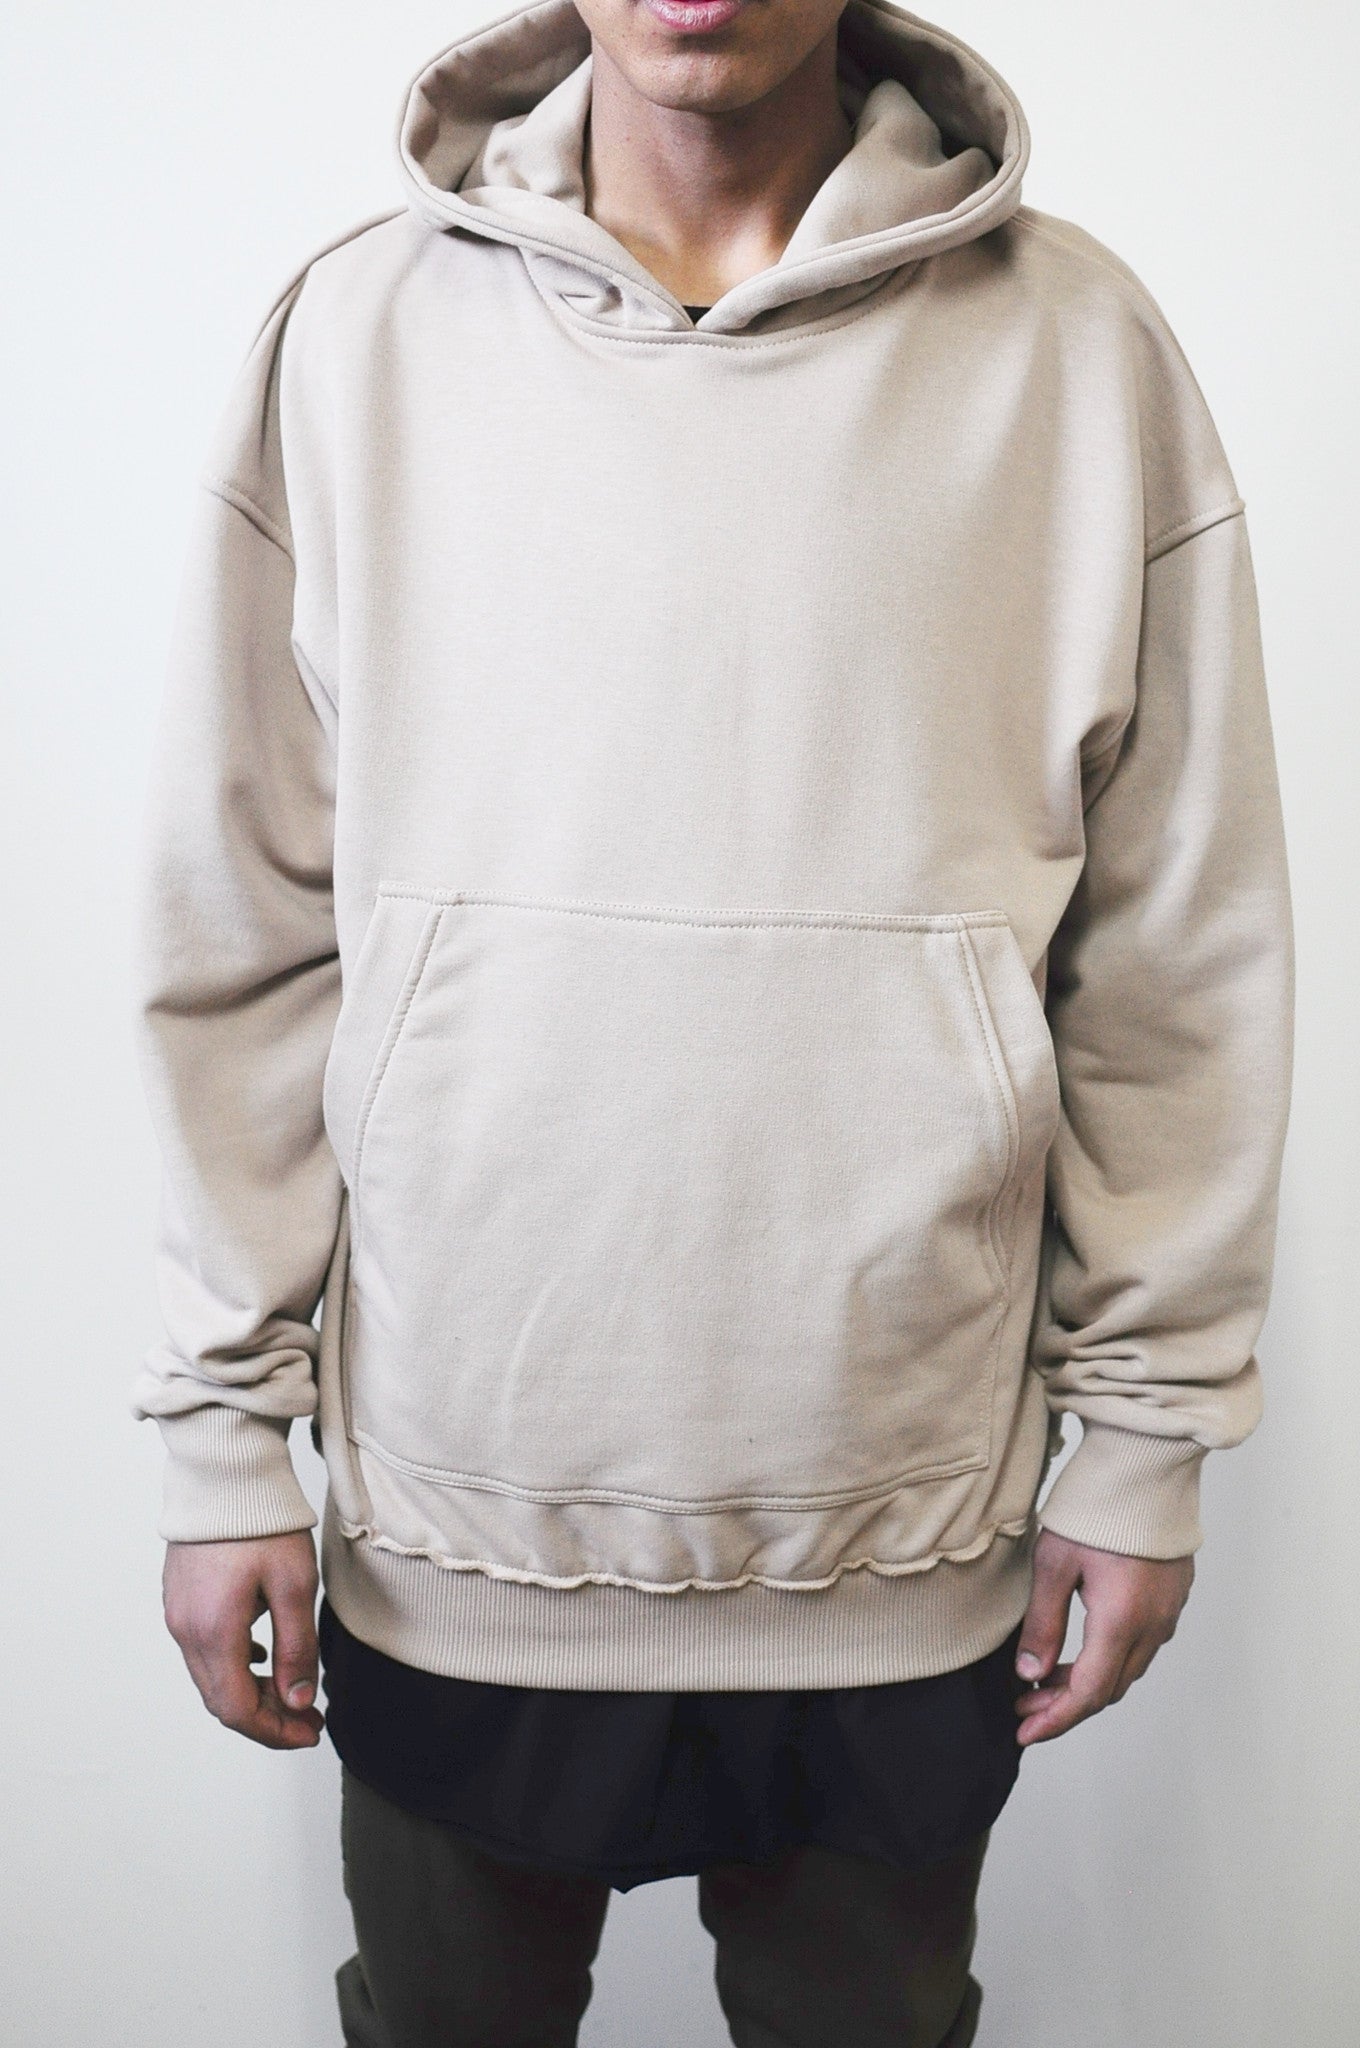 Ripped Frayed Essential Cross Hoodie / Oversized Raw Edges Men's Pullover  Drop Shoulder / 